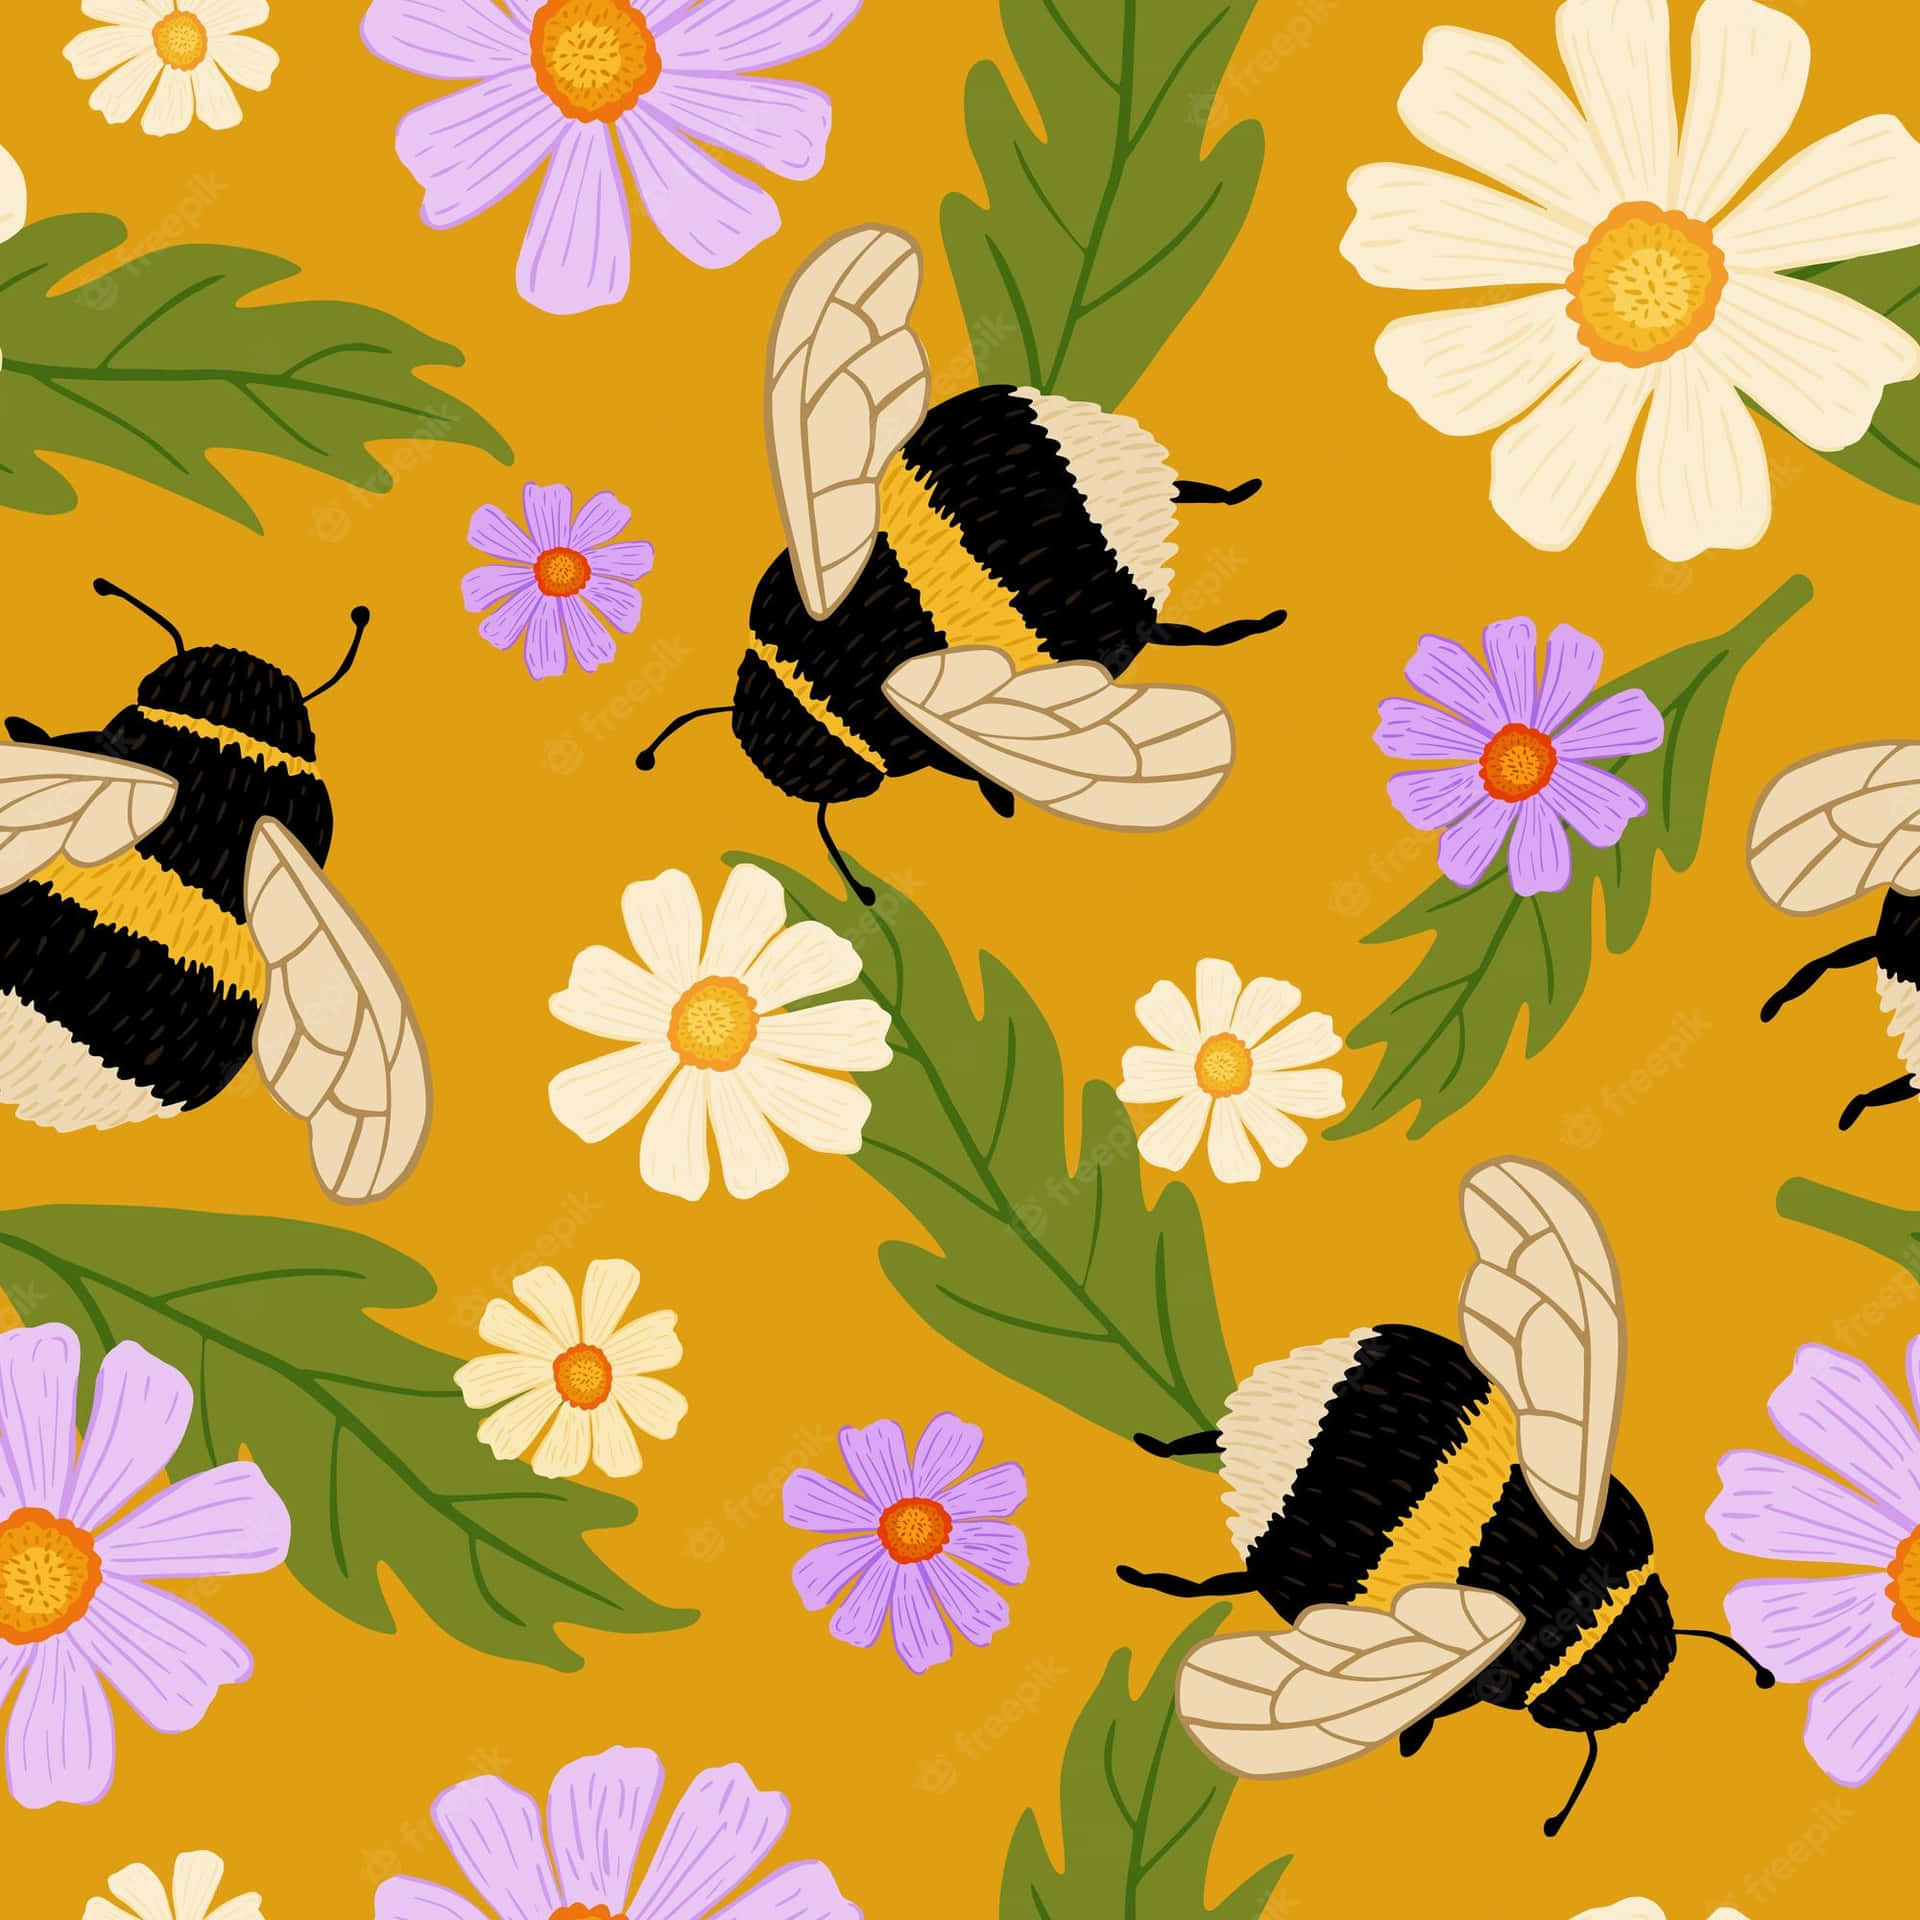 Visit the Garden of Eden with this vintage bee Wallpaper